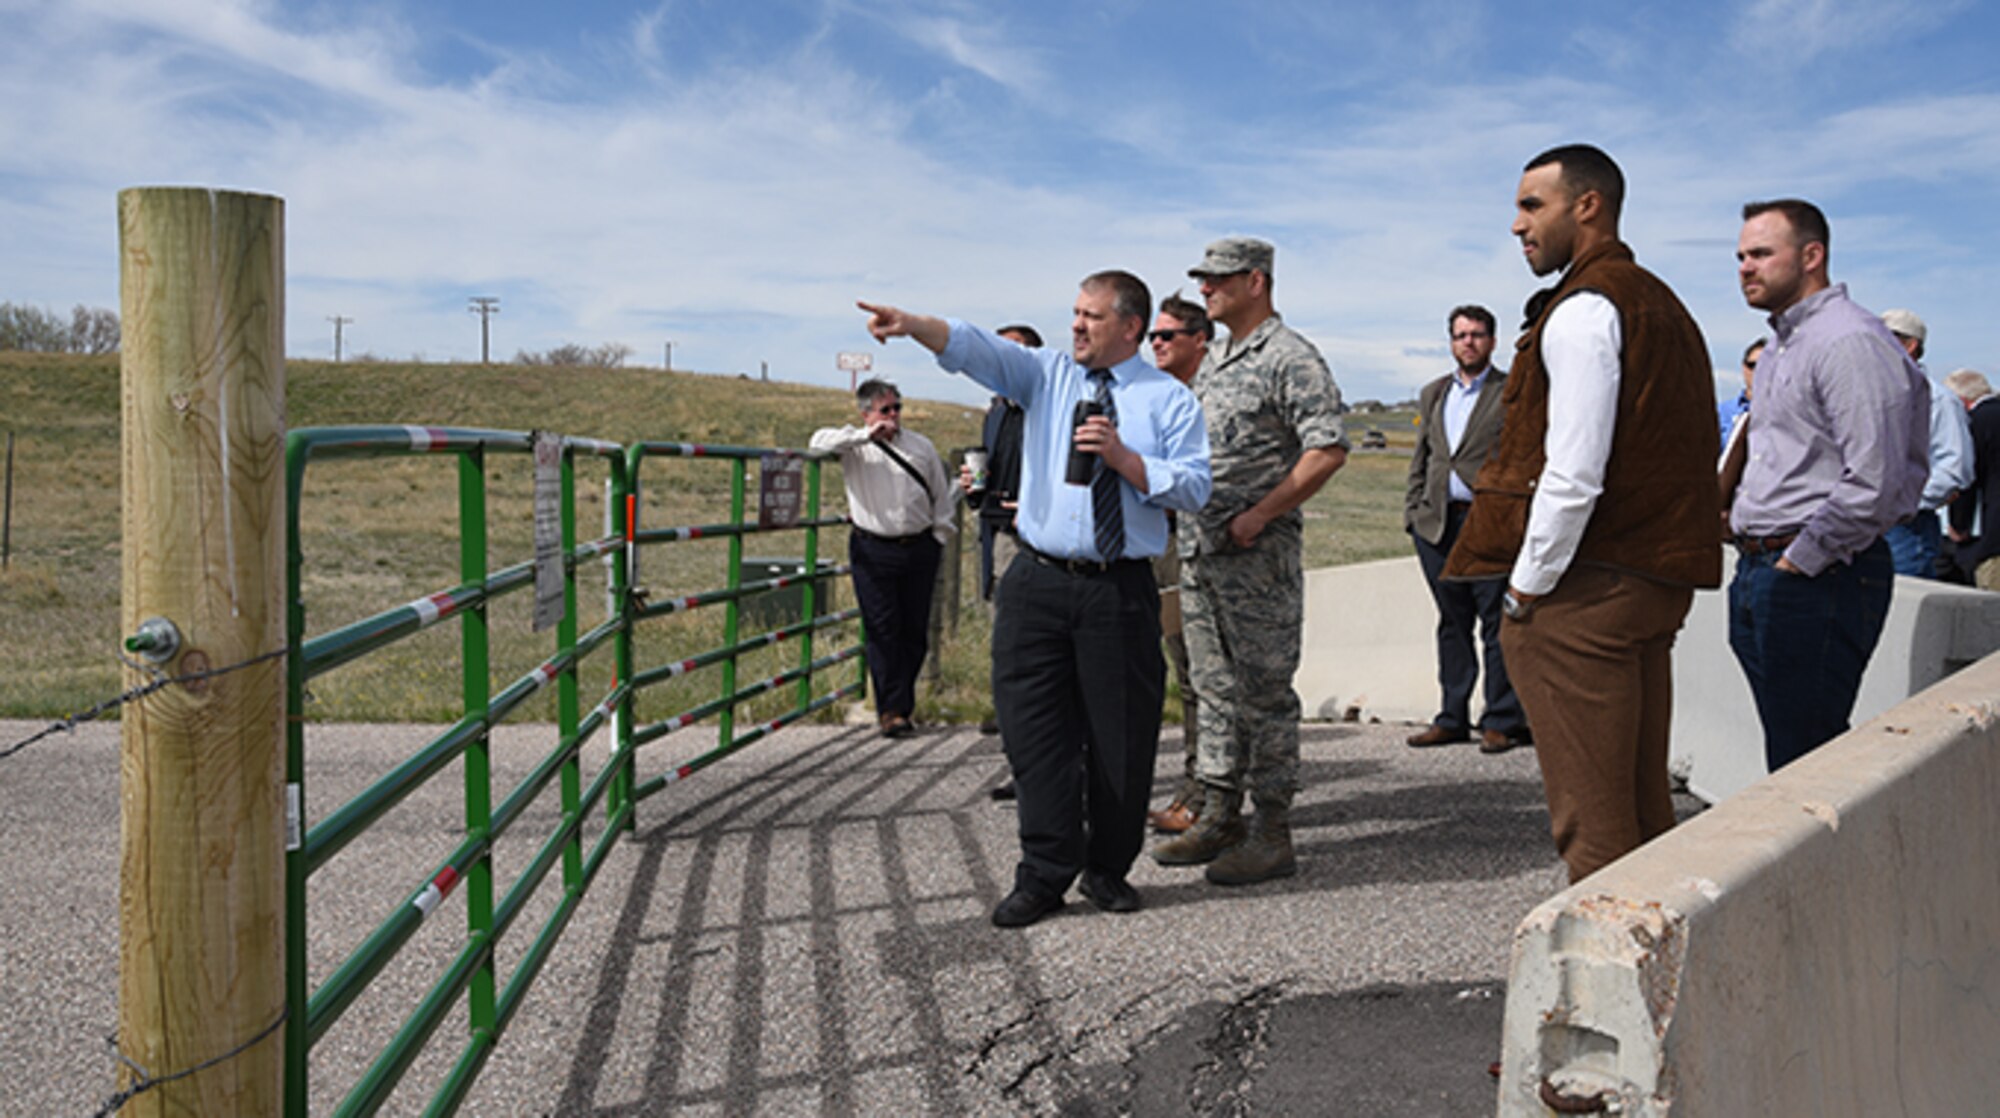 Todd Eldridge, F.E. Warren Enhanced Use Lease project manager, points out the boundaries of the land being considered for development as part of Industry Day at F.E. Warren Air Force Base, Wyo., April 18, 2017. 74 acres on the south border of the base are being opened to public bid for development as part of the EUL. More than thirty individuals came to the event, representing more than 15 property-development organizations. (U.S. Air Force photo by Glenn S. Robertson)